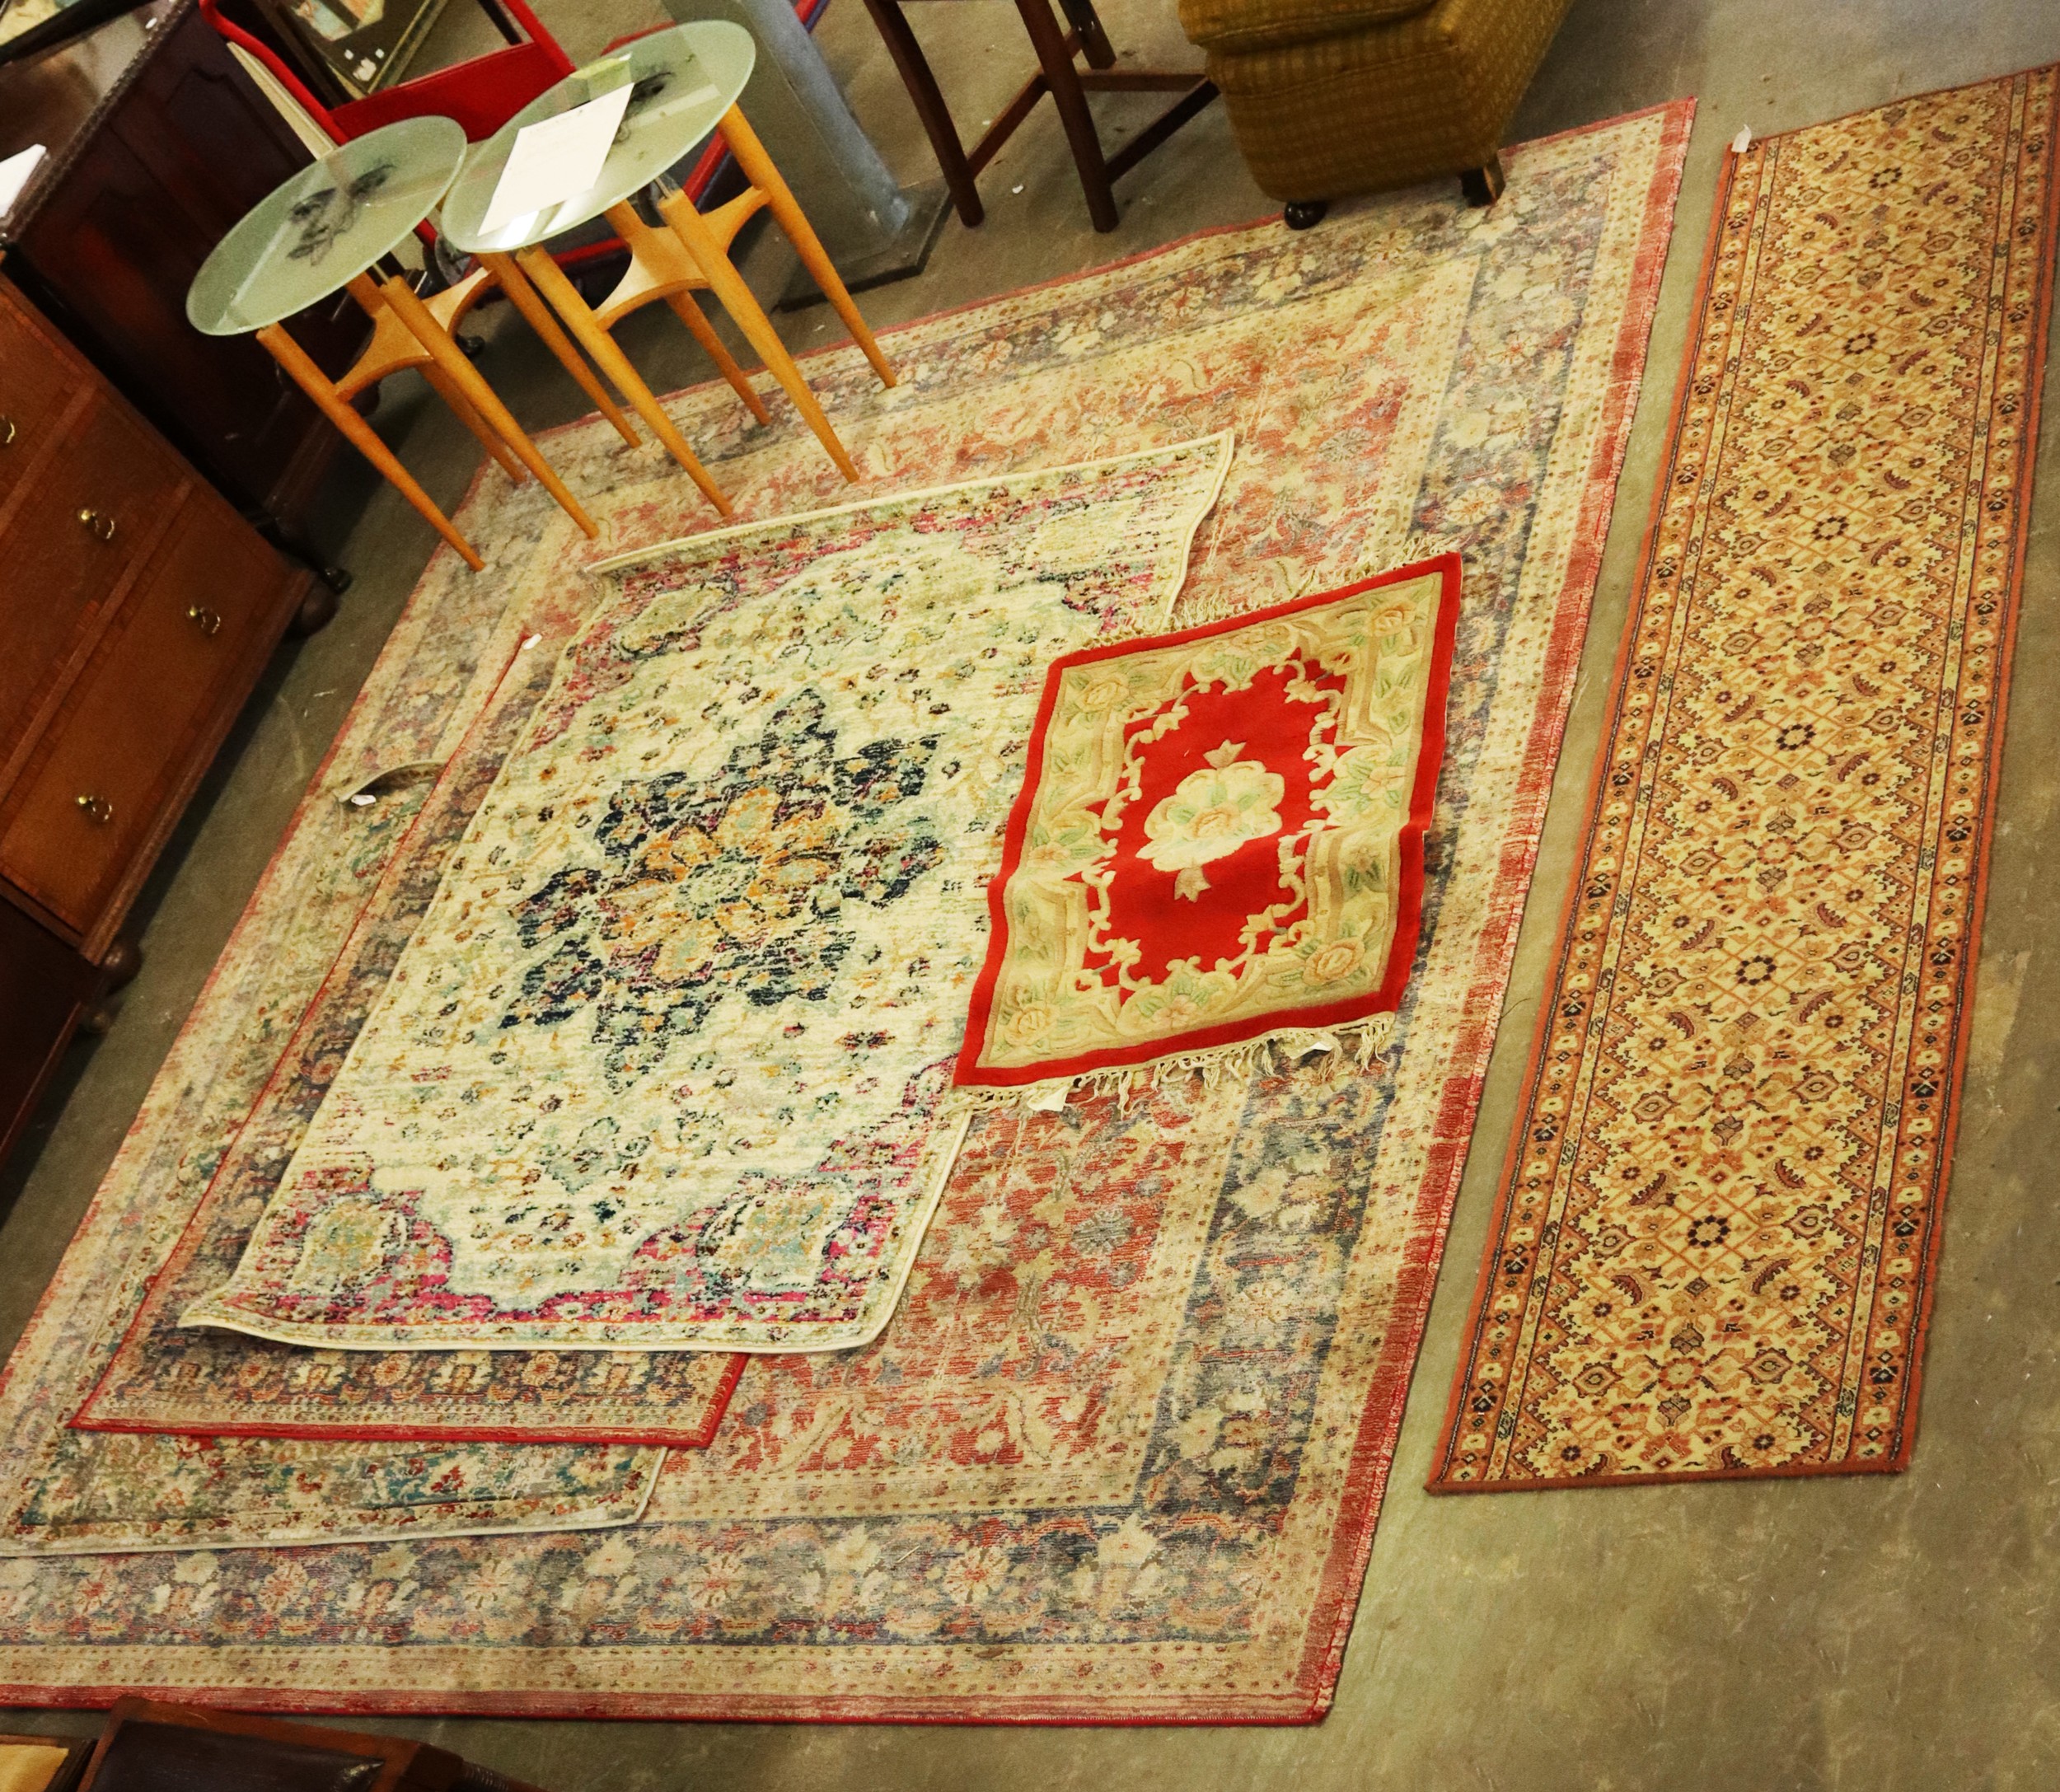 LARGE 9'10 X 7'9" EASTERN STYLE CARPET OF WORN EFFECT, THREE SMALLER SIMILAR RUGS, A RUNNER AND